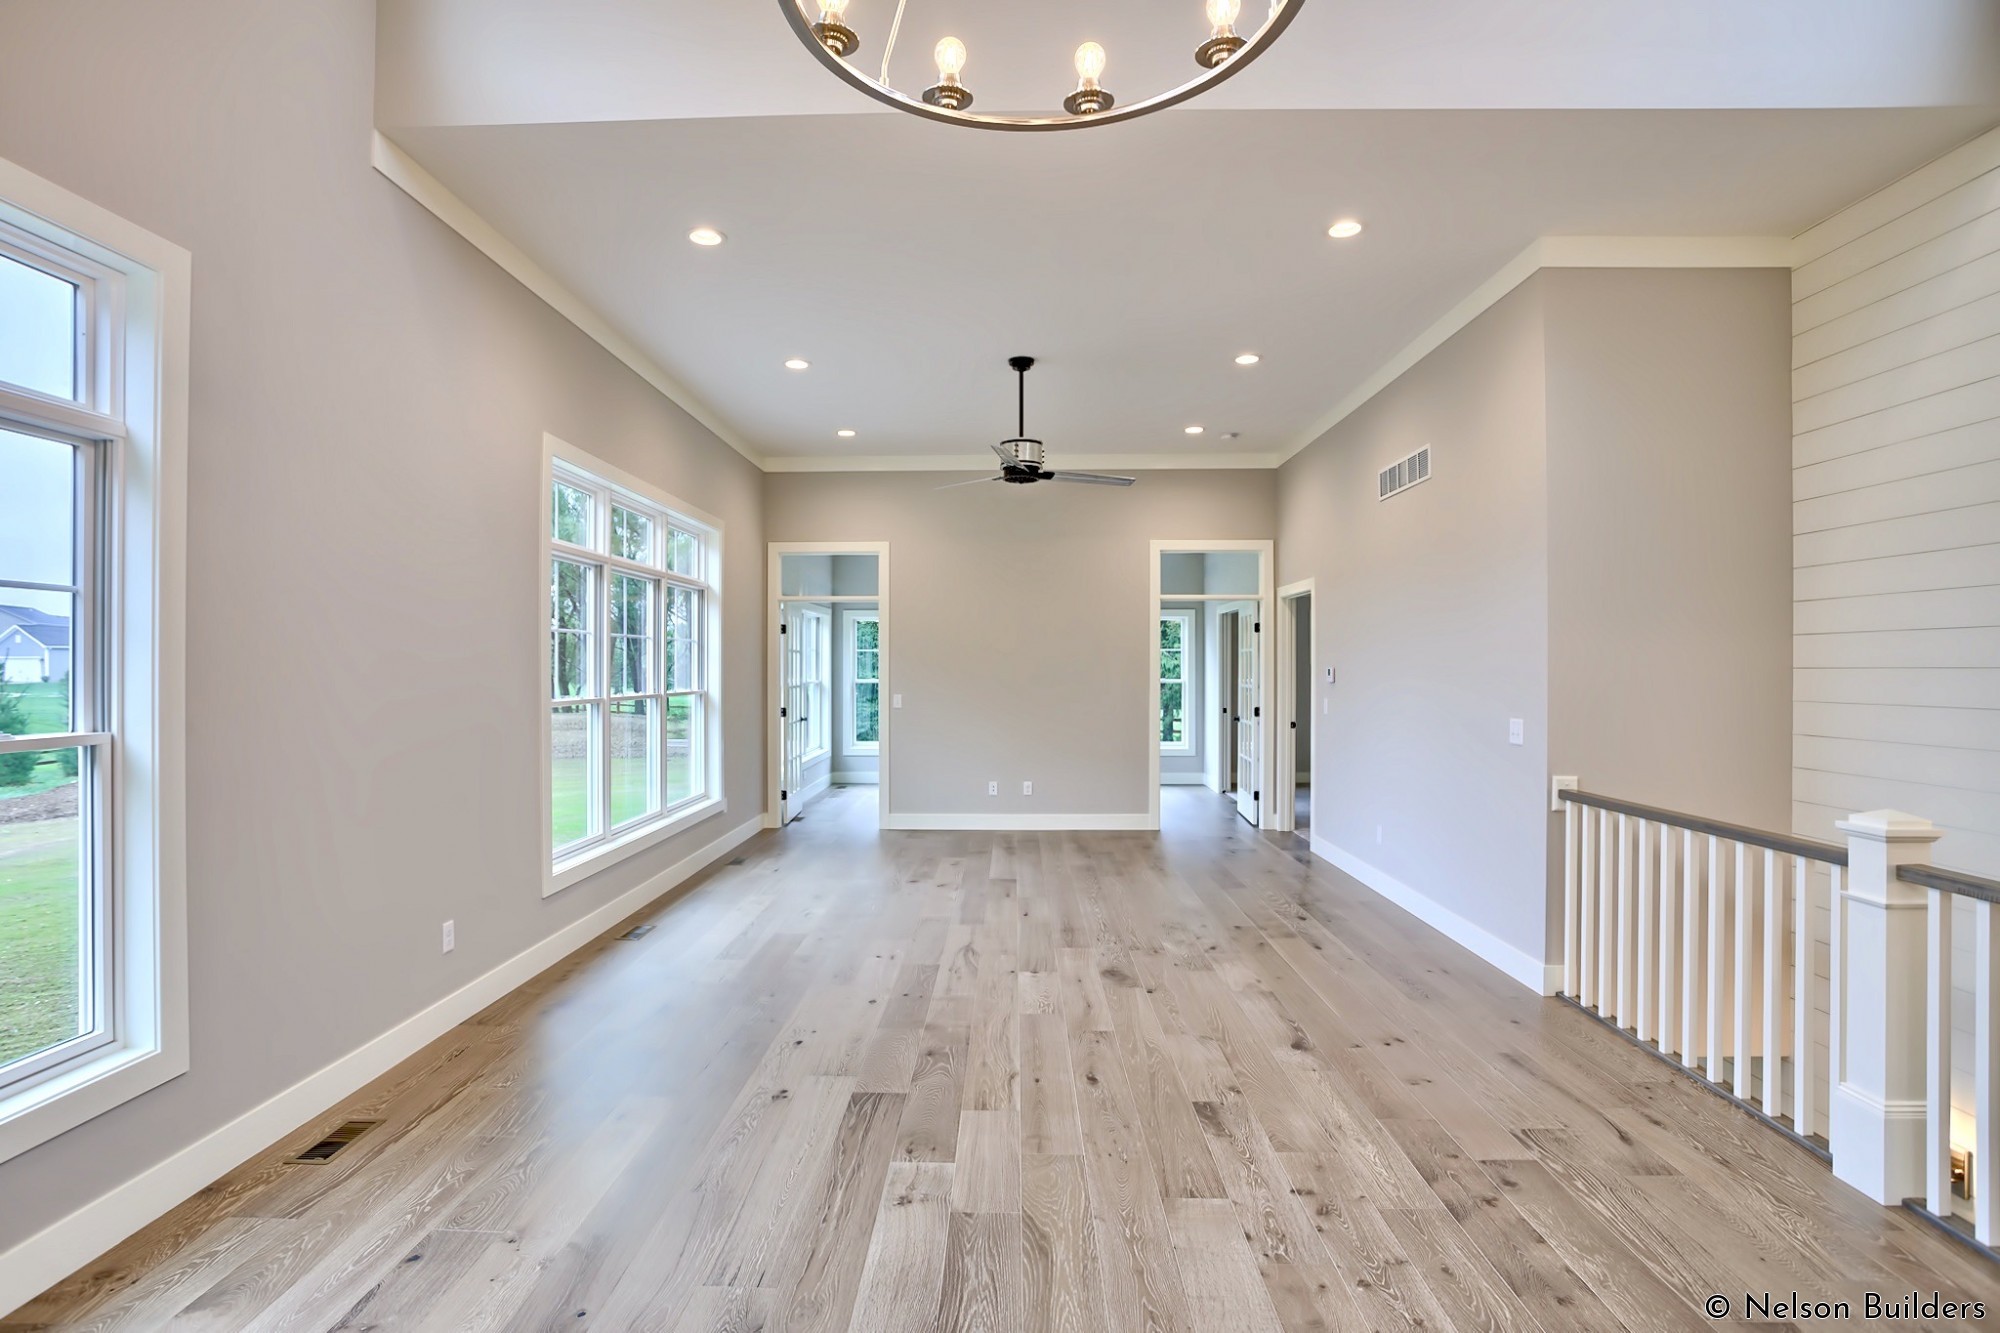 The 11-foot ceilings of the great room open to windows on the front and back over the 16-foot dining area.